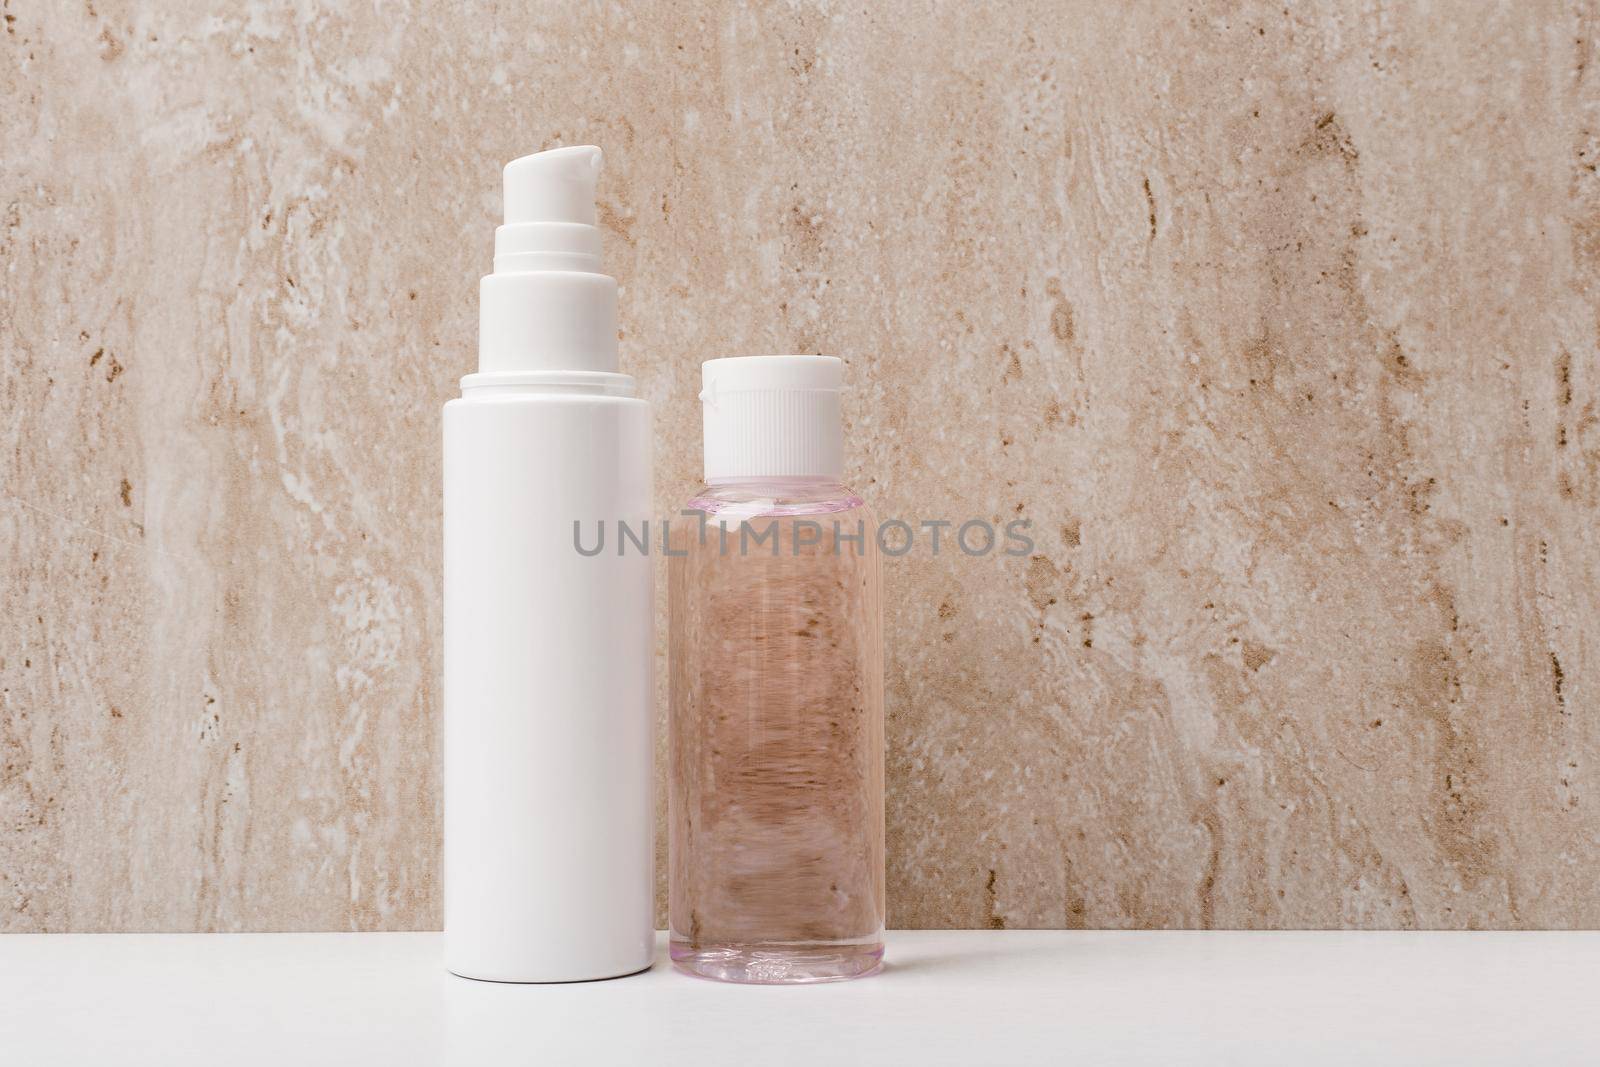 Two skincare products against marble background with a space for text